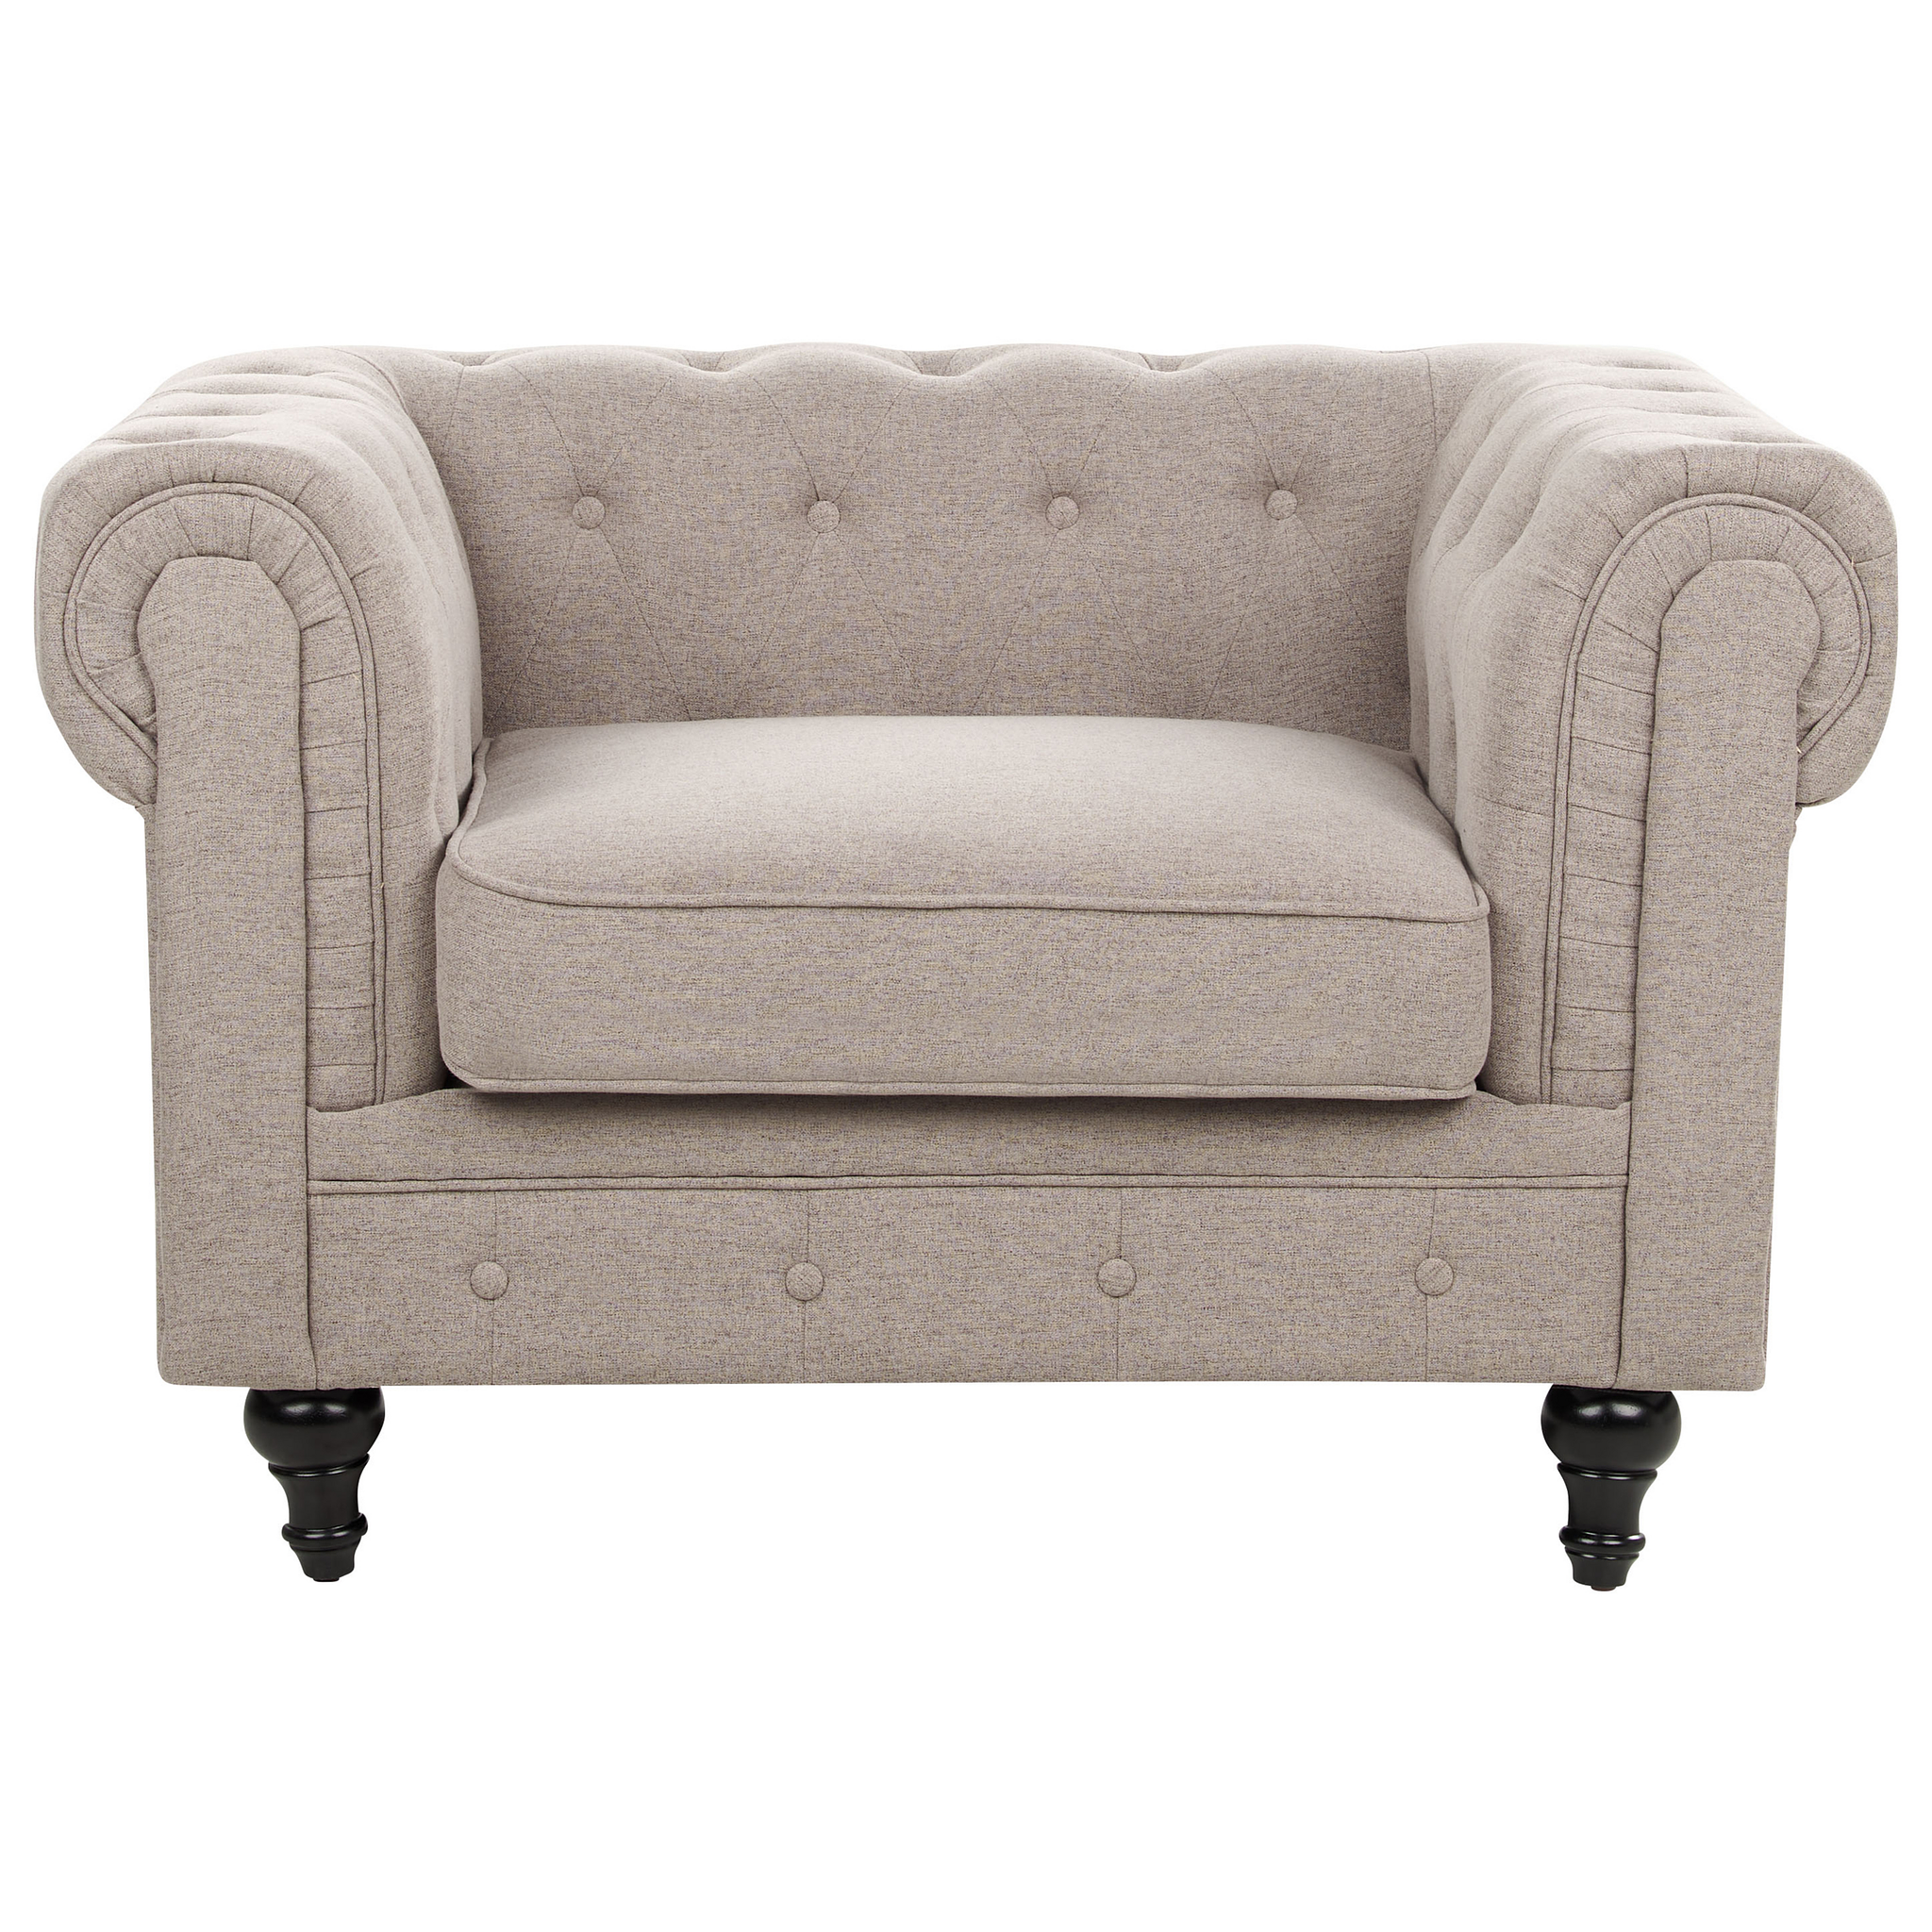 Beliani CHESTERFIELD - Chesterfield fauteuil - Taupe - Polyester